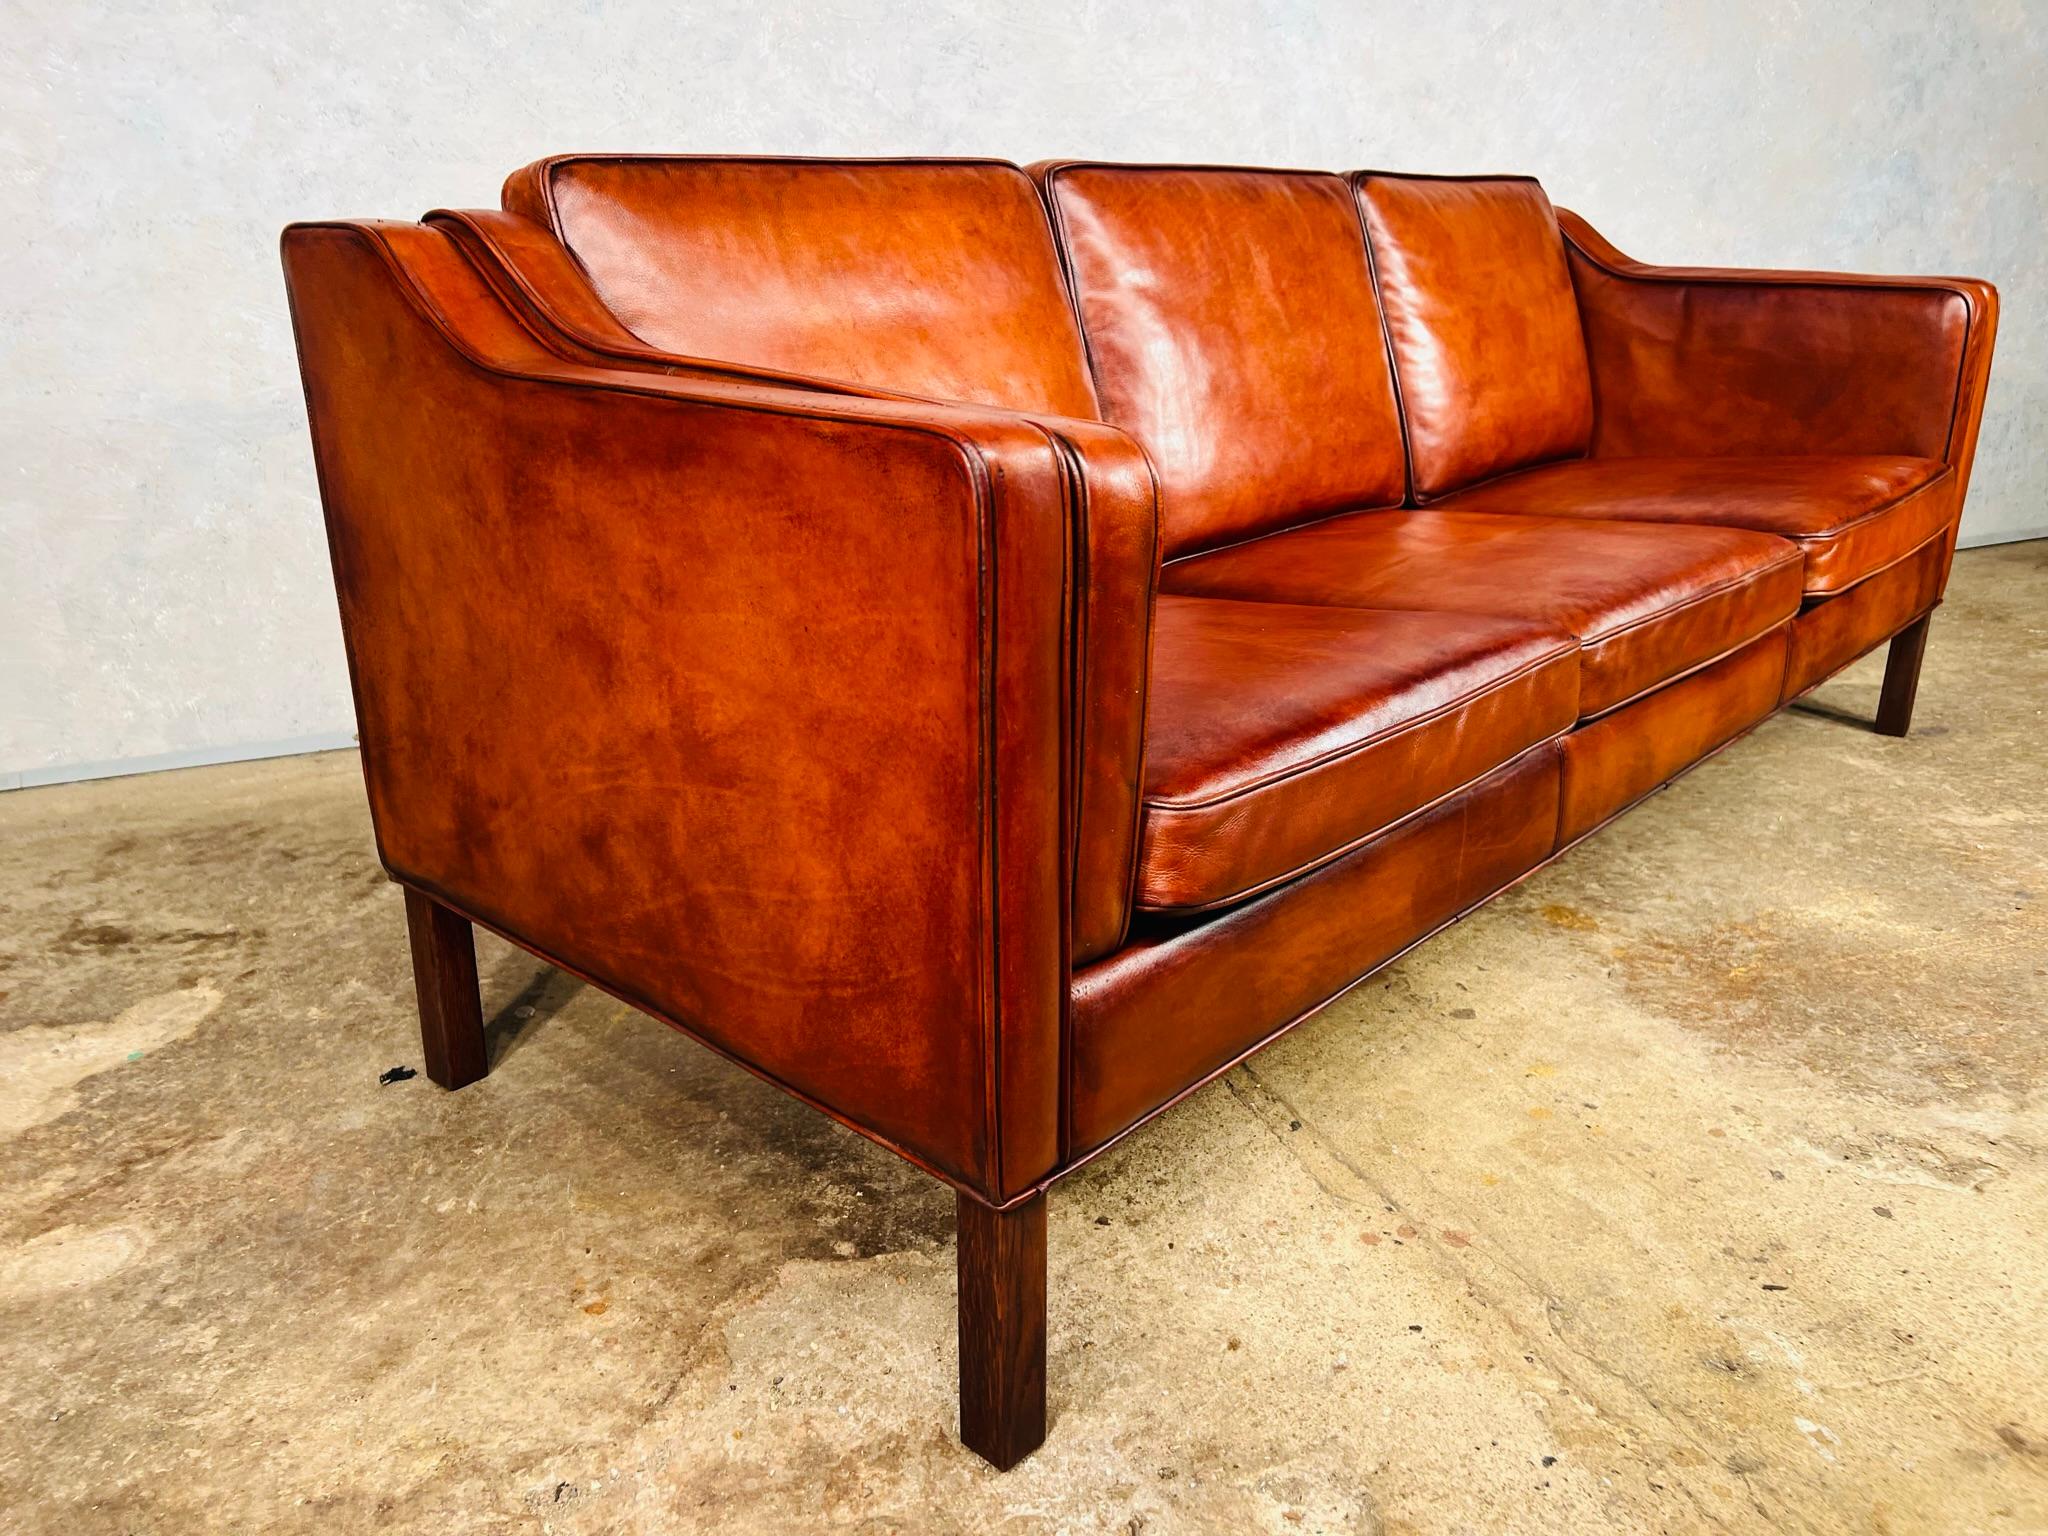 Long Vintage 1970s Danish Patinated Cognac 3 Seater Leather Sofa In Good Condition For Sale In Lewes, GB